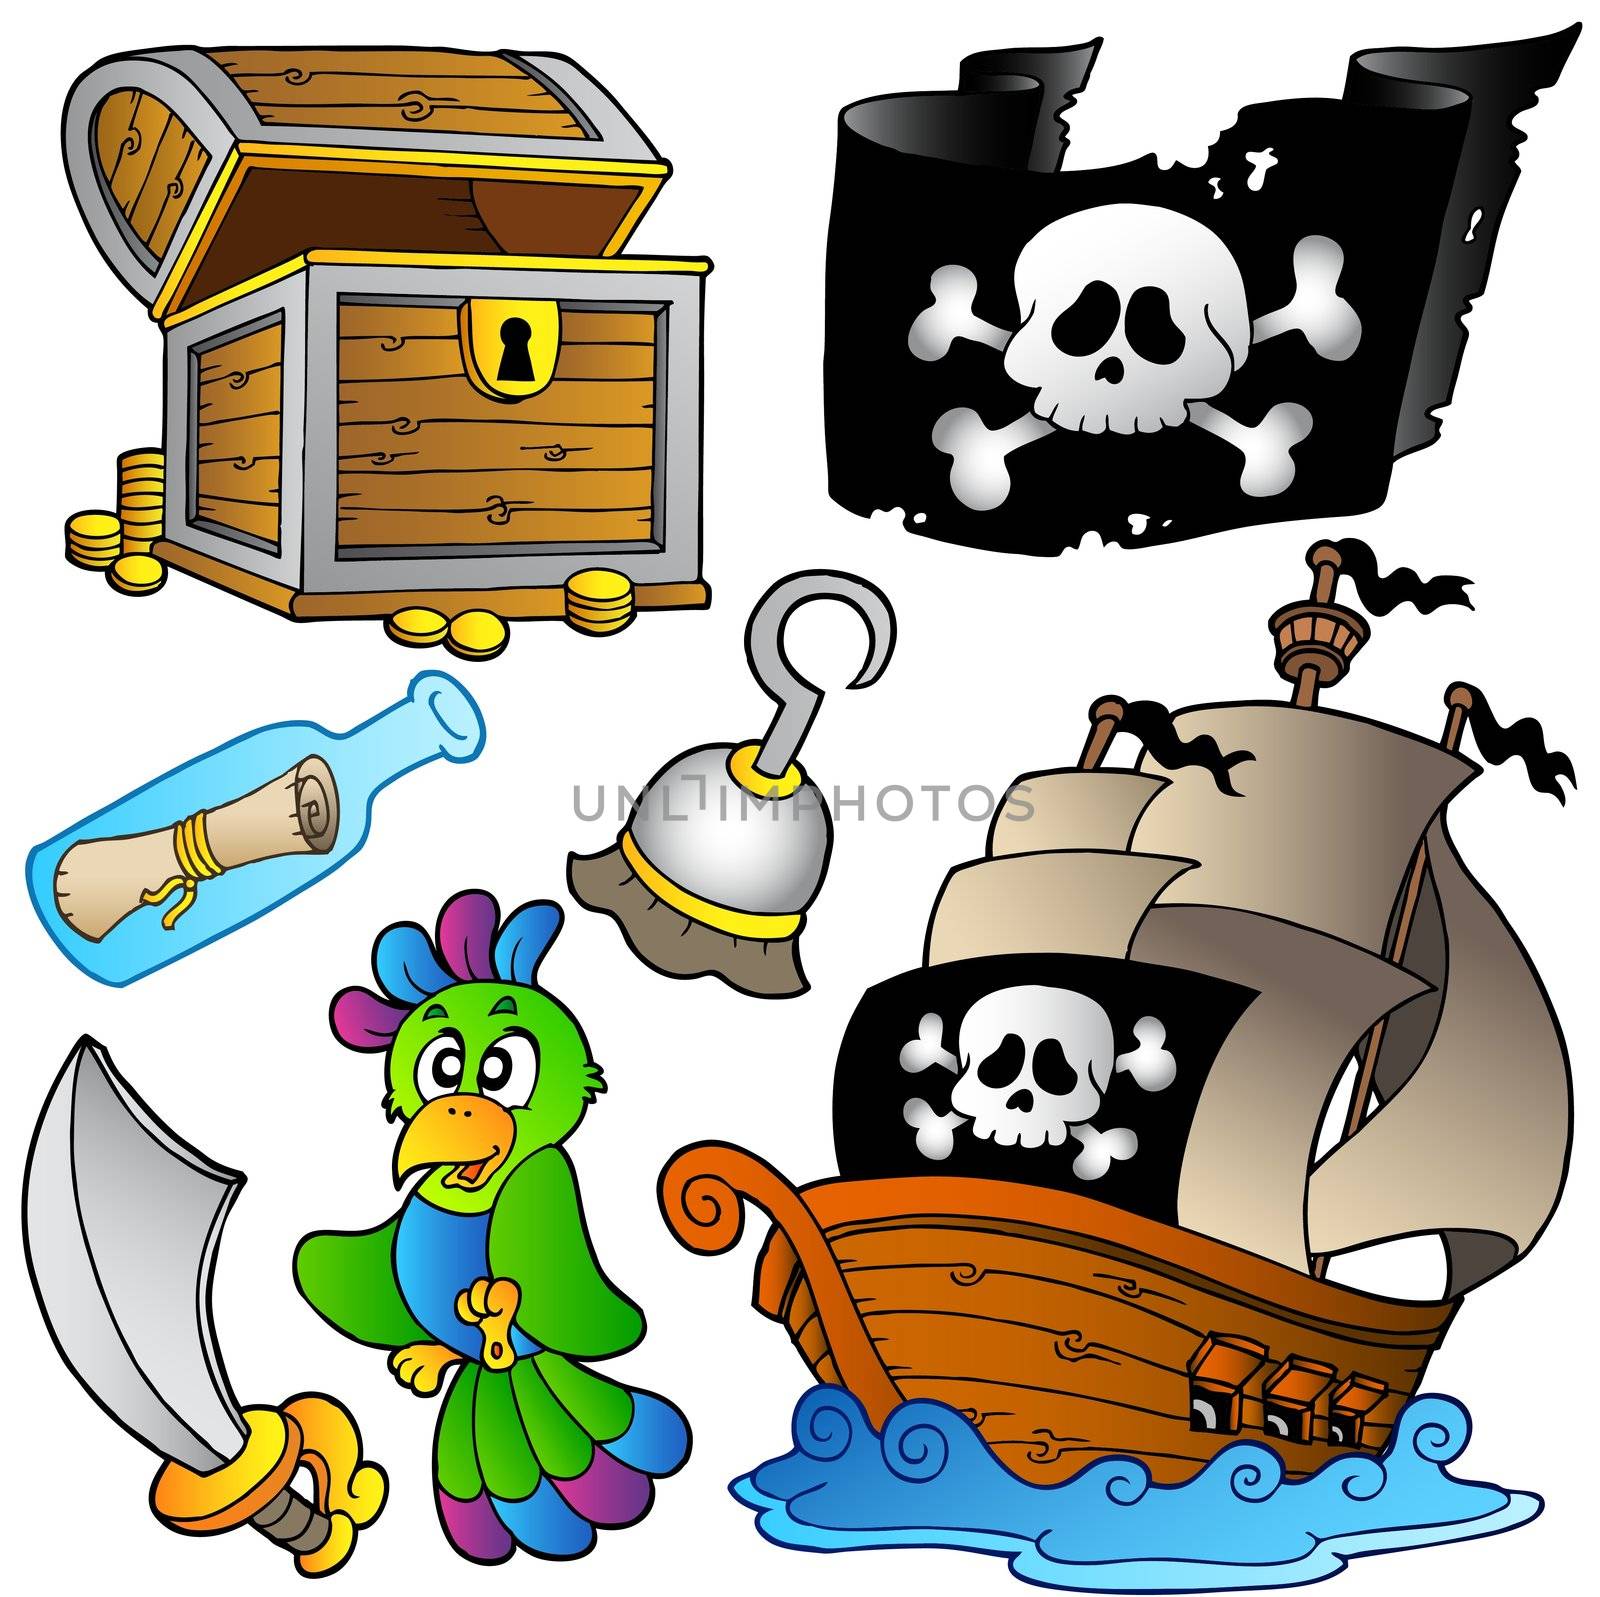 Pirate collection with wooden ship - vector illustration.